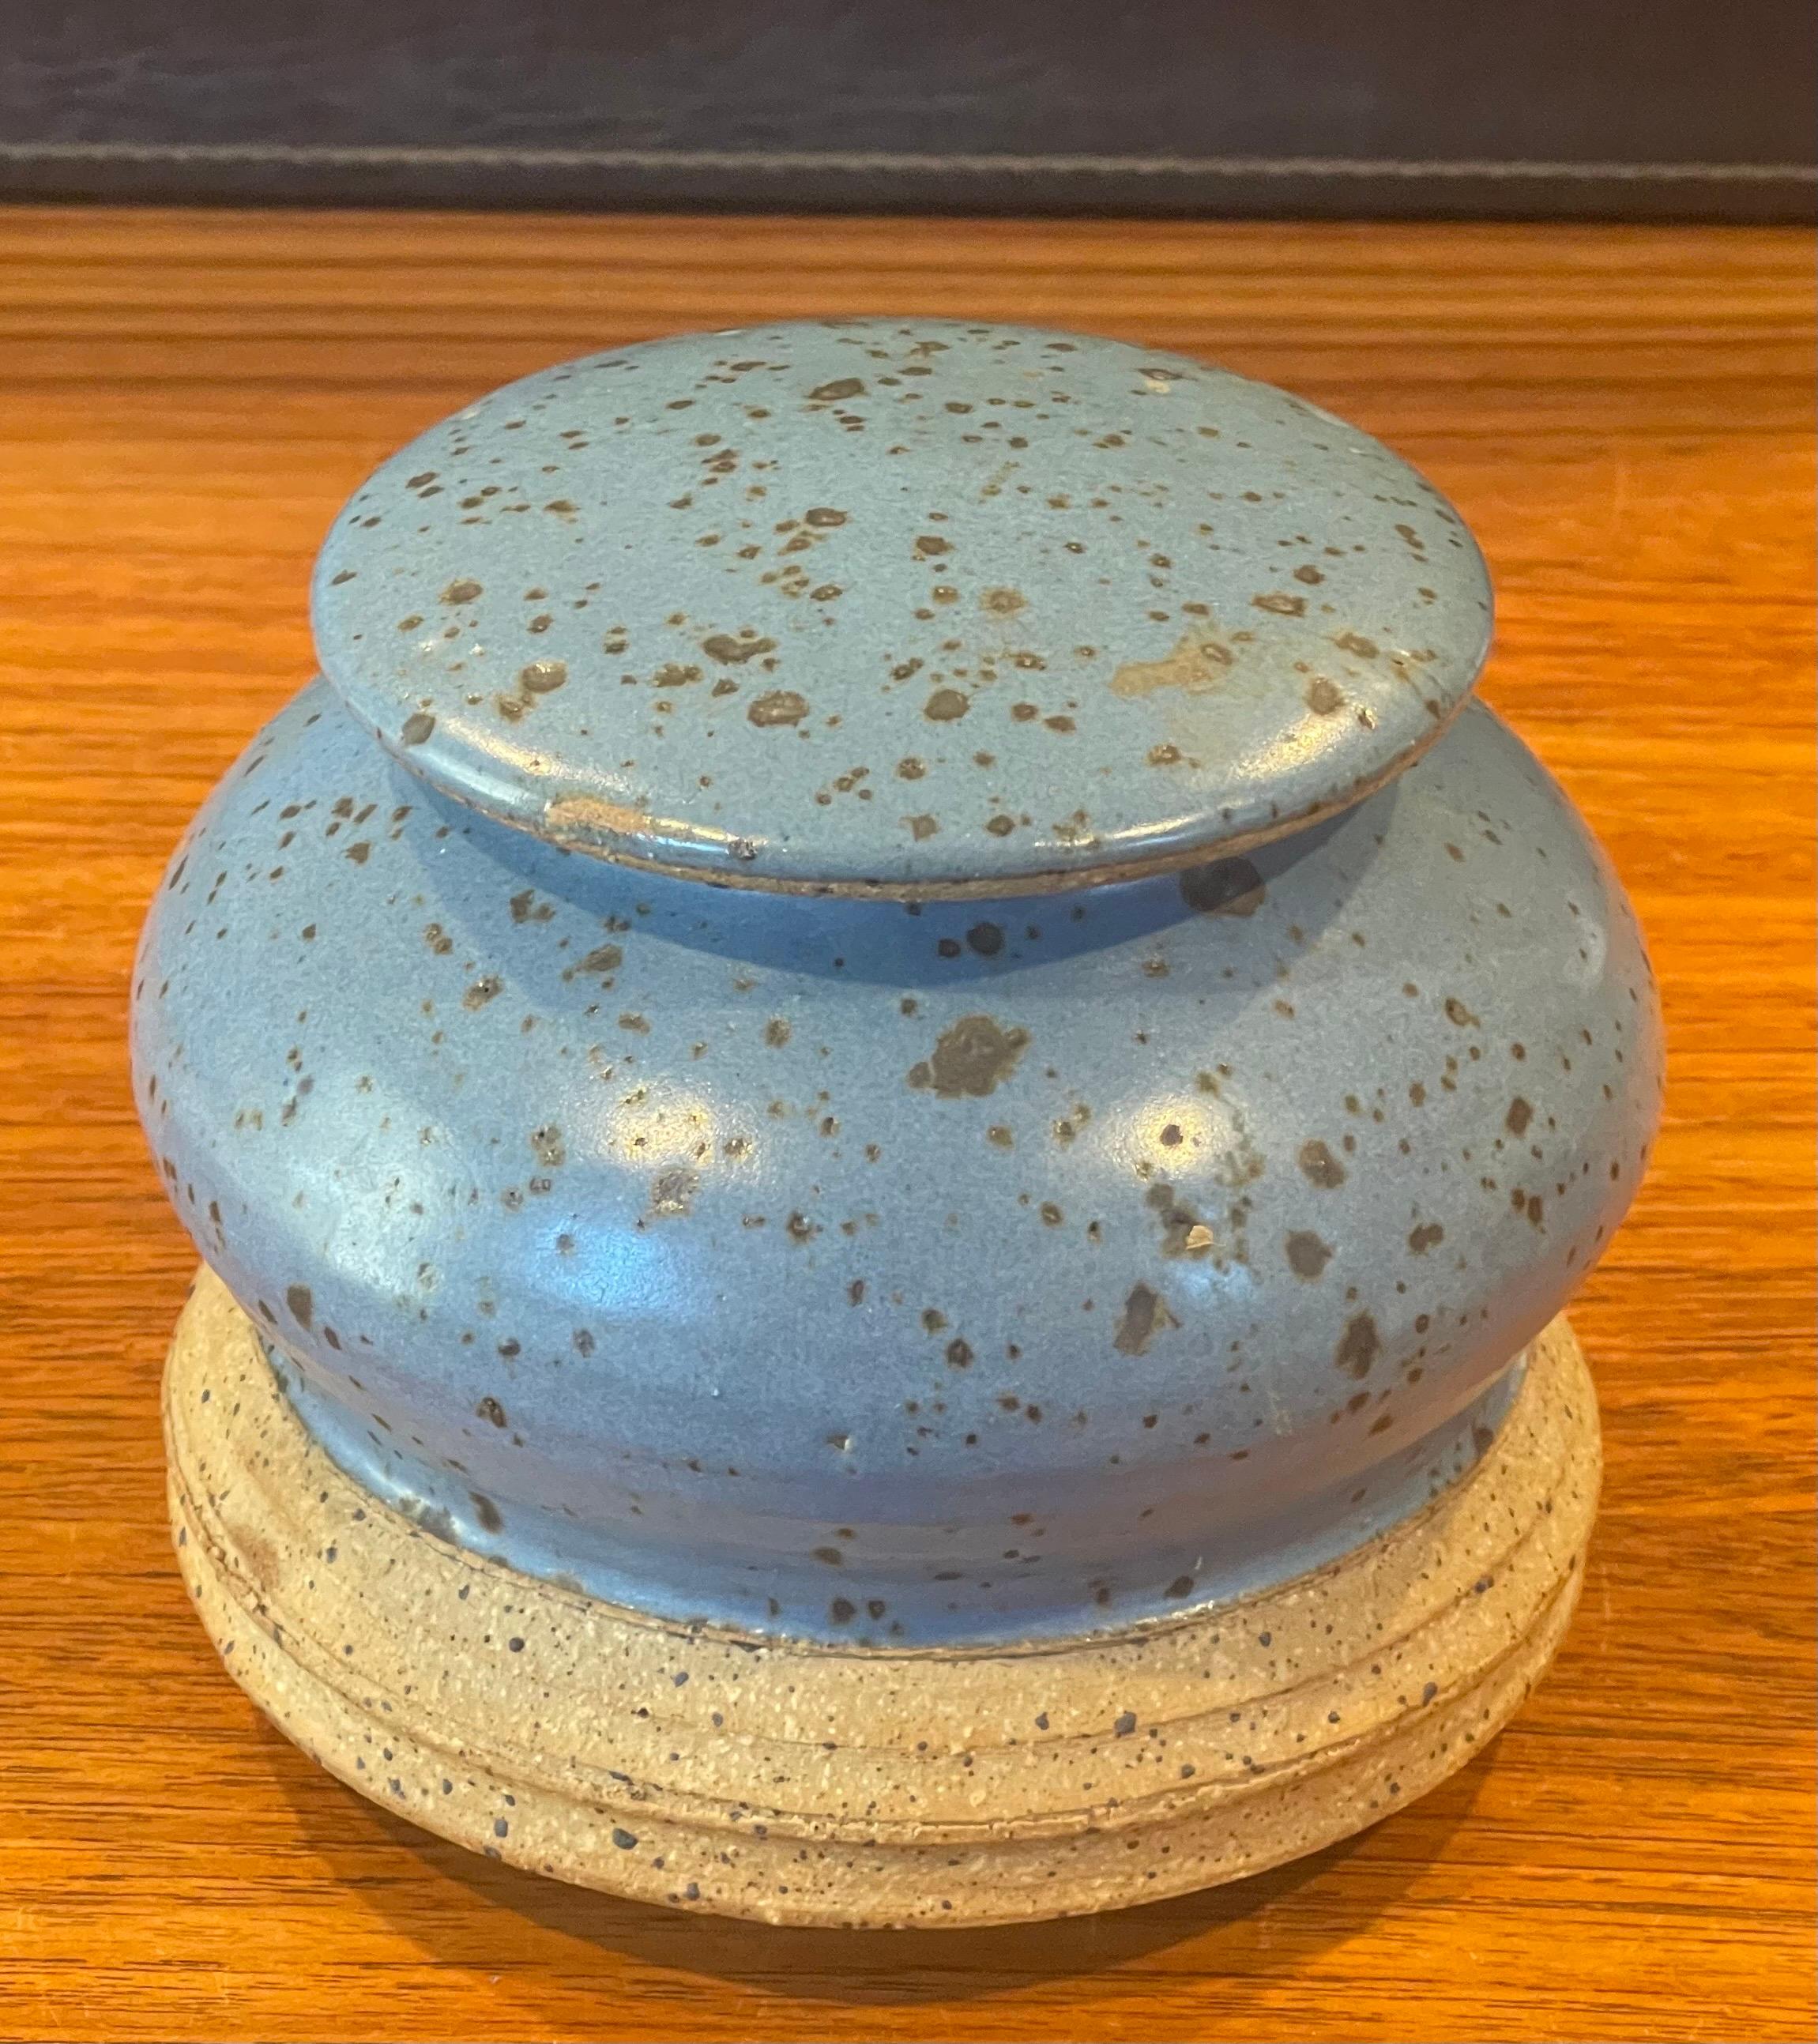 MCM stoneware studio pottery jar with lid, circa 1970s. This gorgeous hand finished jar has a wonderful design, texture and color. The piece measures 6